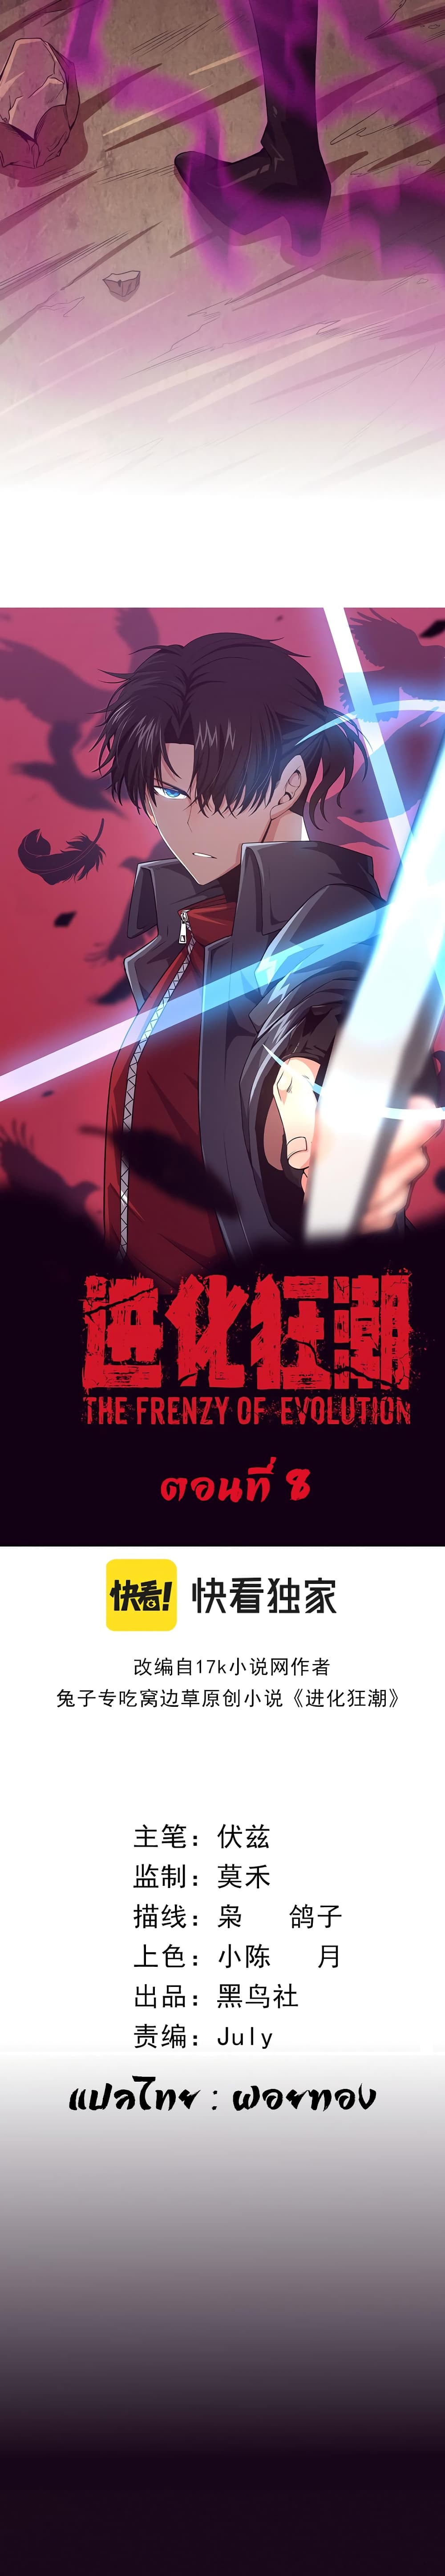 The Frenzy of Evolution 8 02